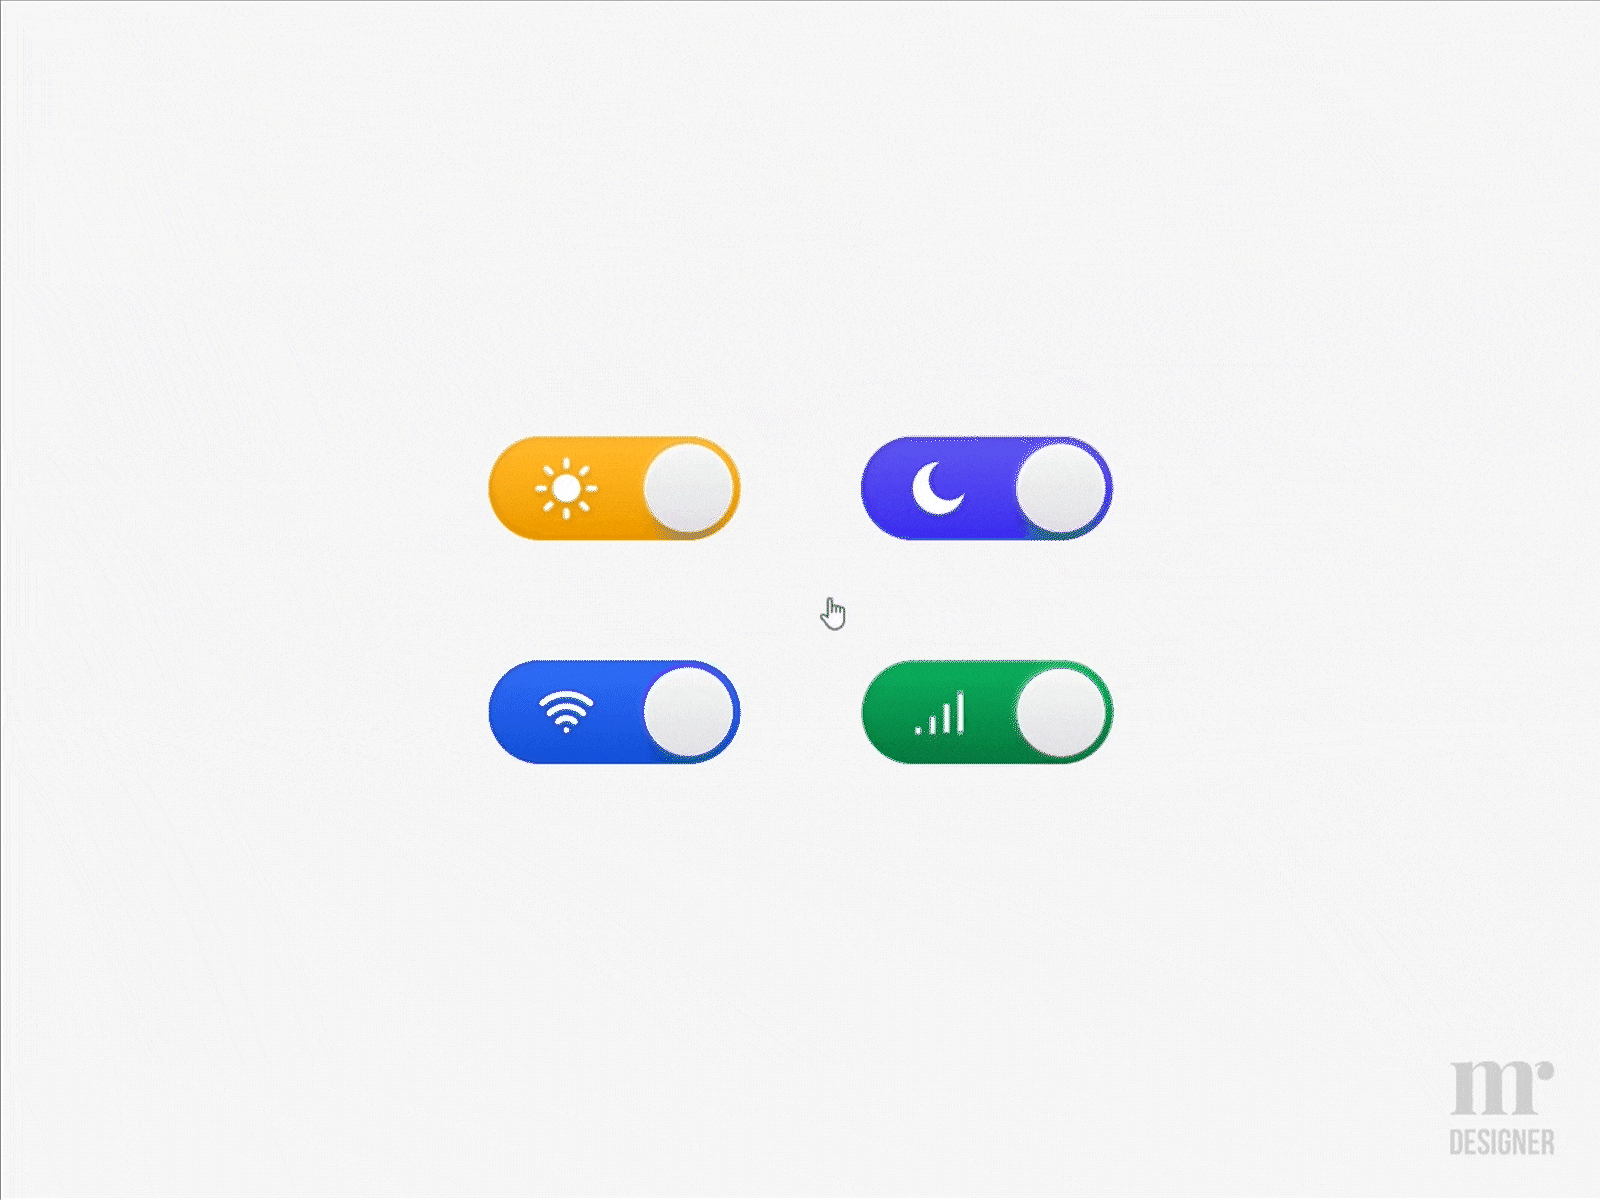 On Off Switch Interaction Animation - Daily UI 015 animation bouncy dailyui design icon illustration interaction interaction design moon motion off on signal sun switch switch on ui ux vector wifi